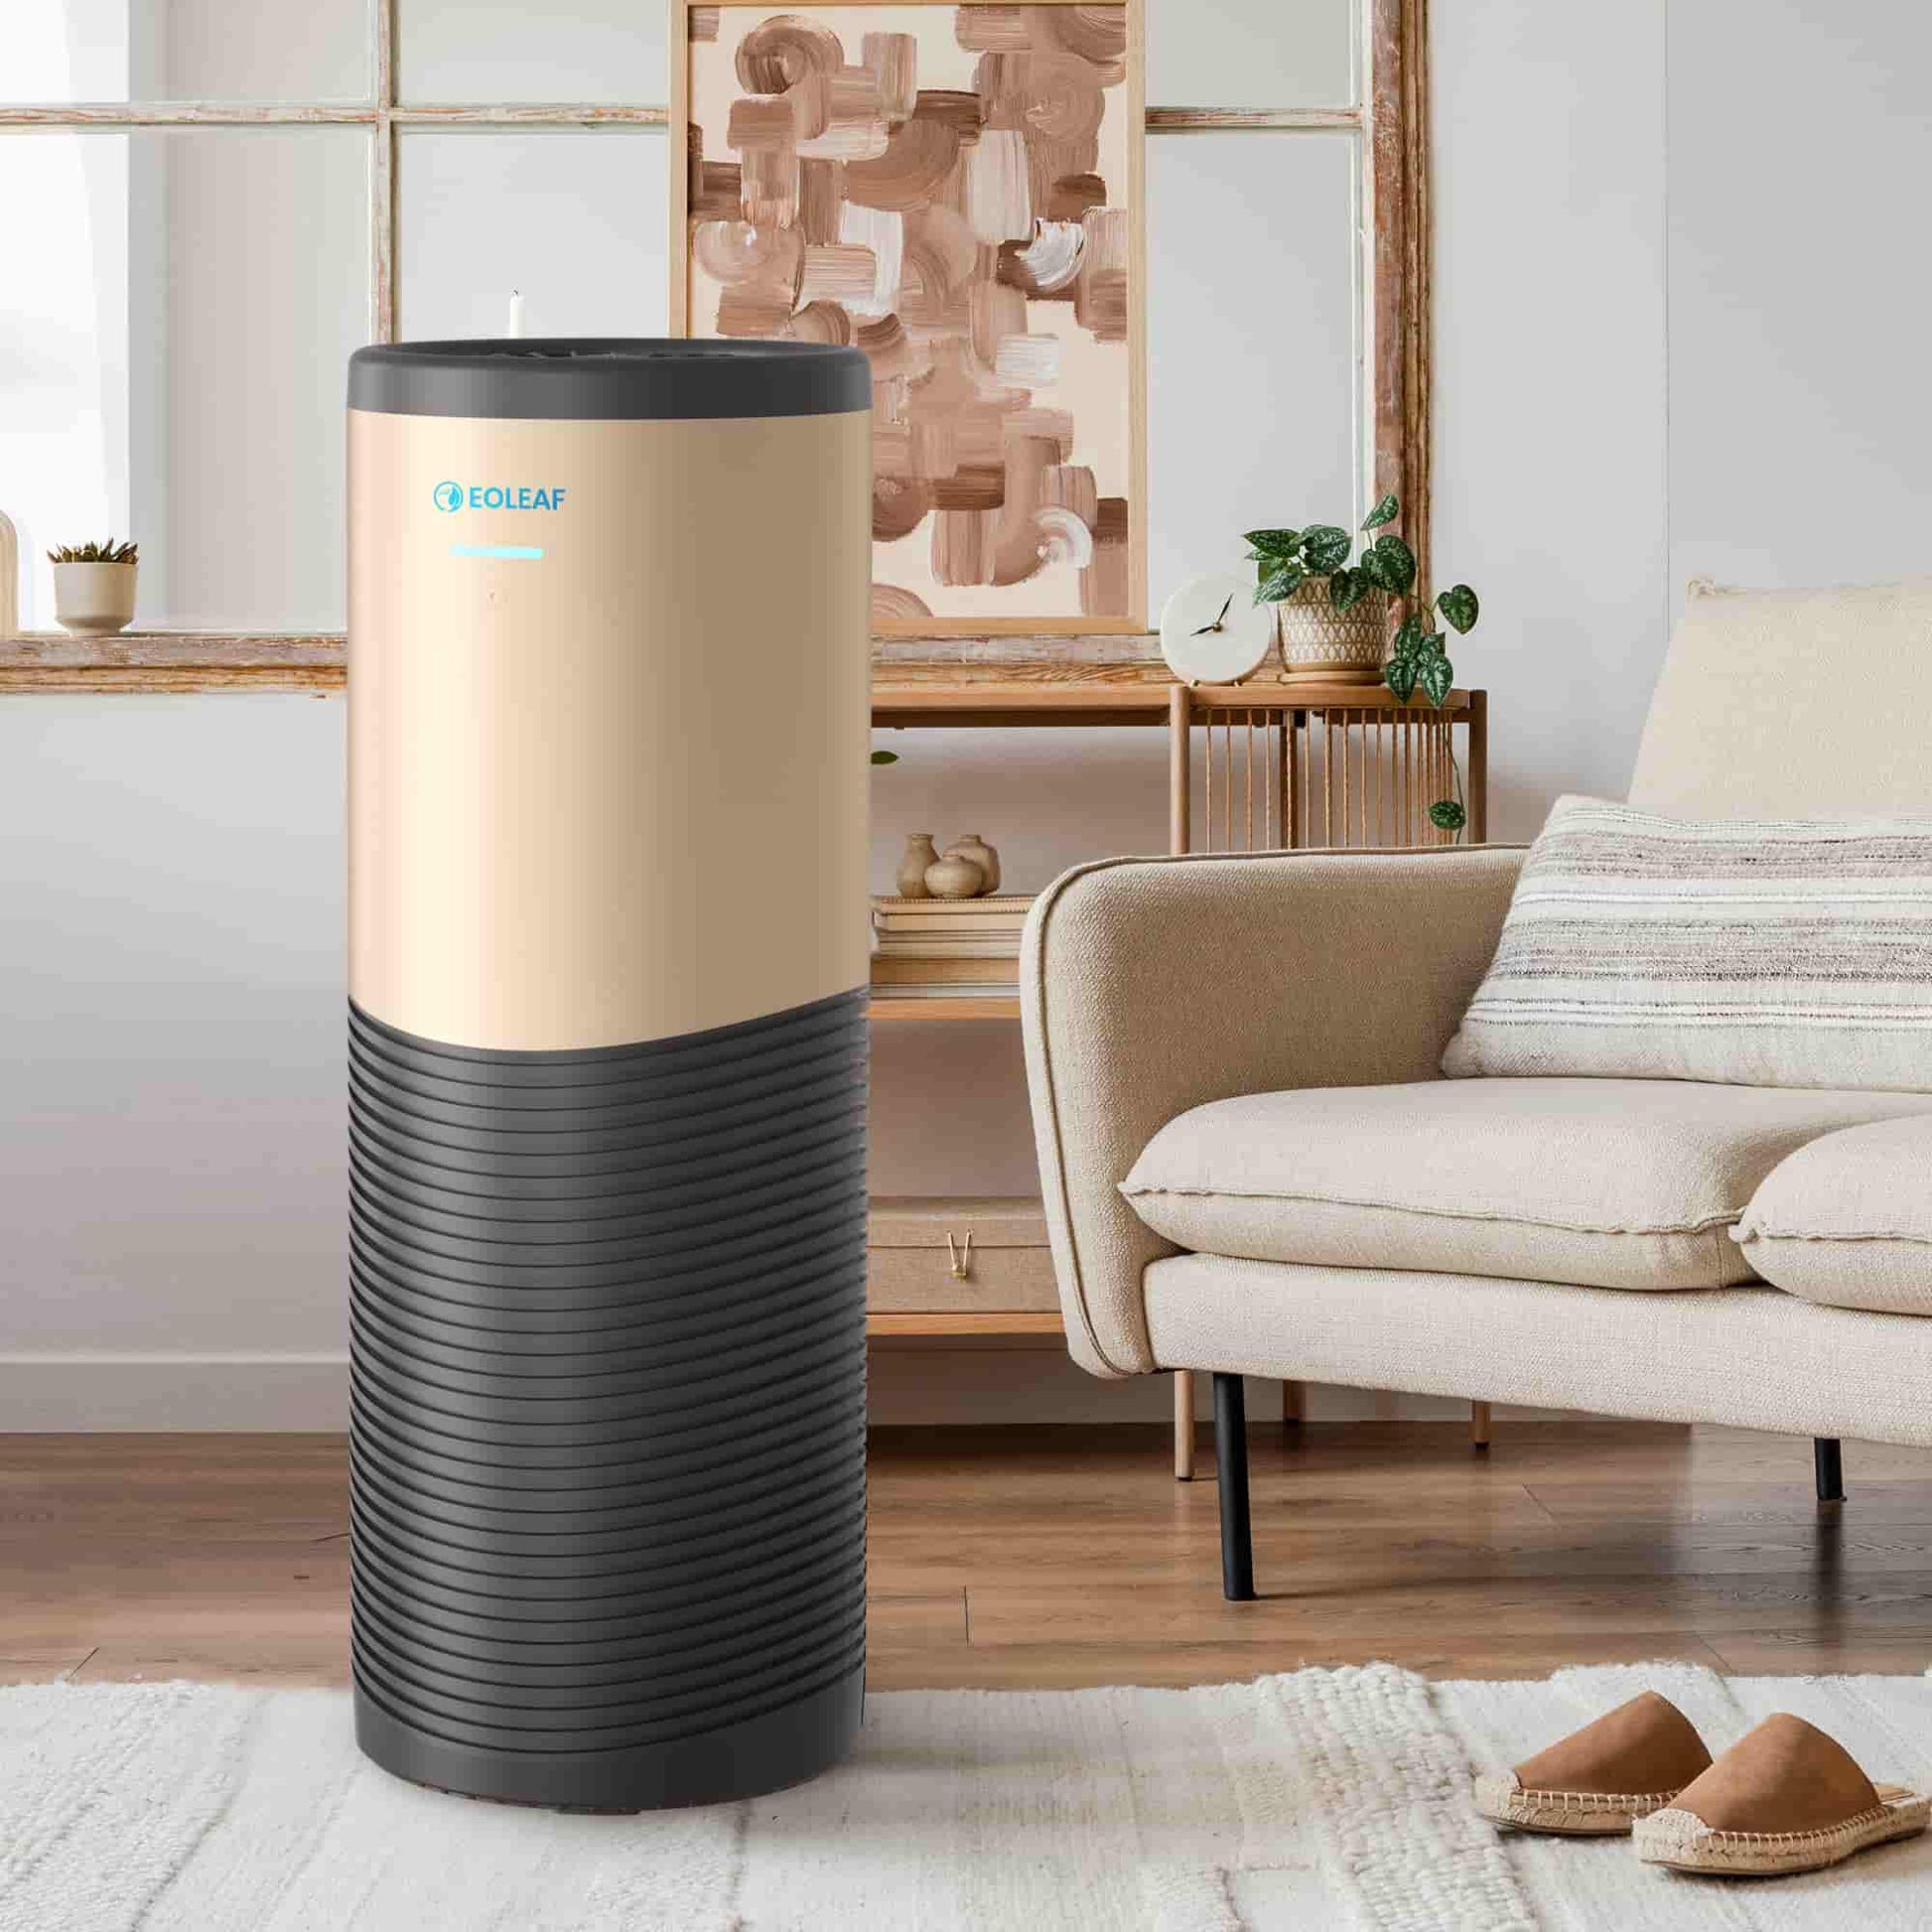 The AEROPRO 150 air purifier in a living room